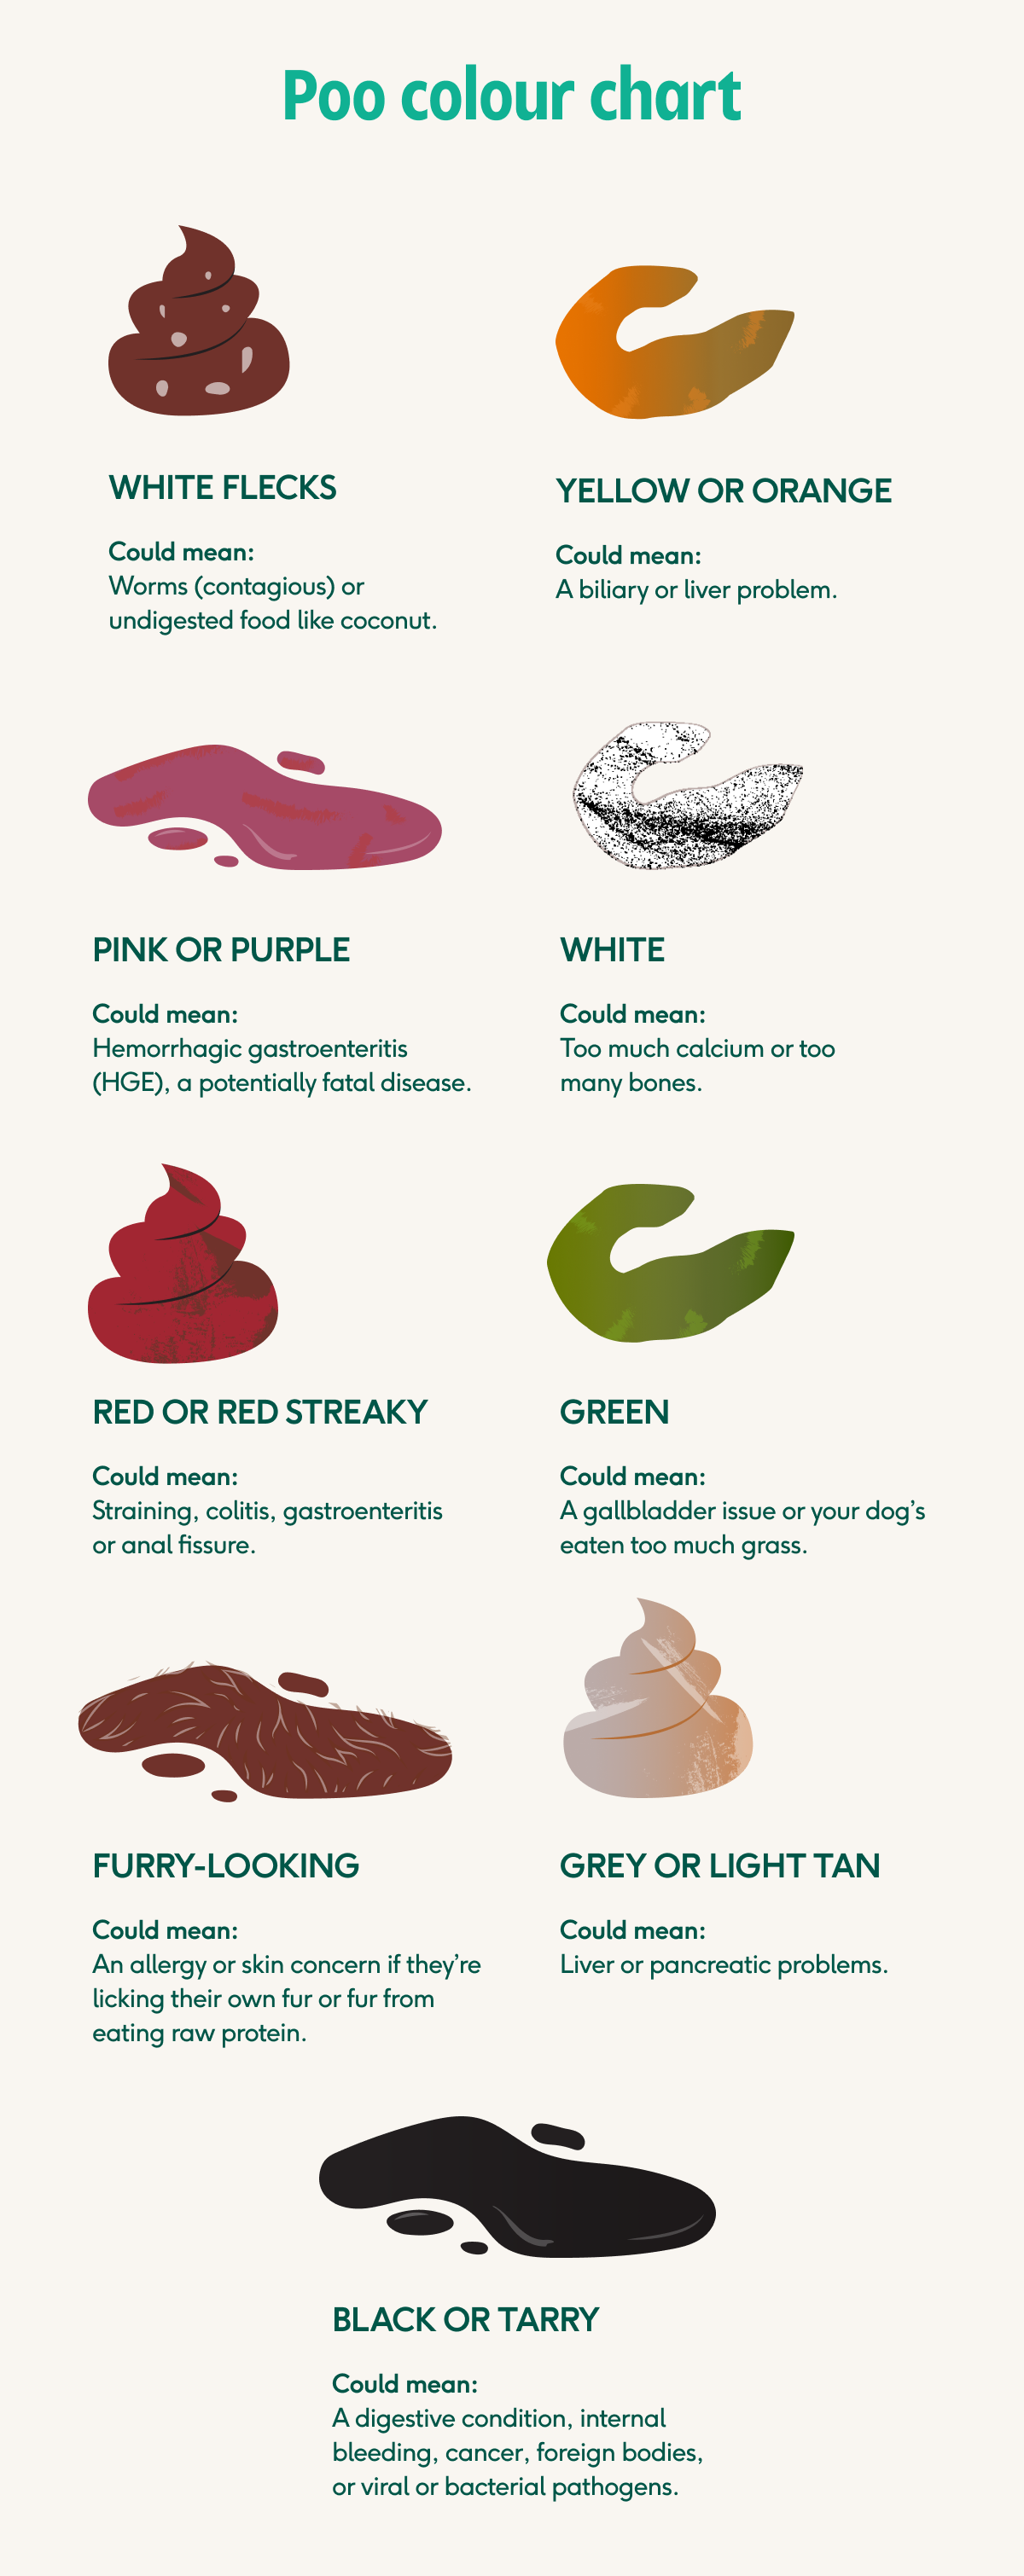 Dog Poop Color Chart, What's Normal?